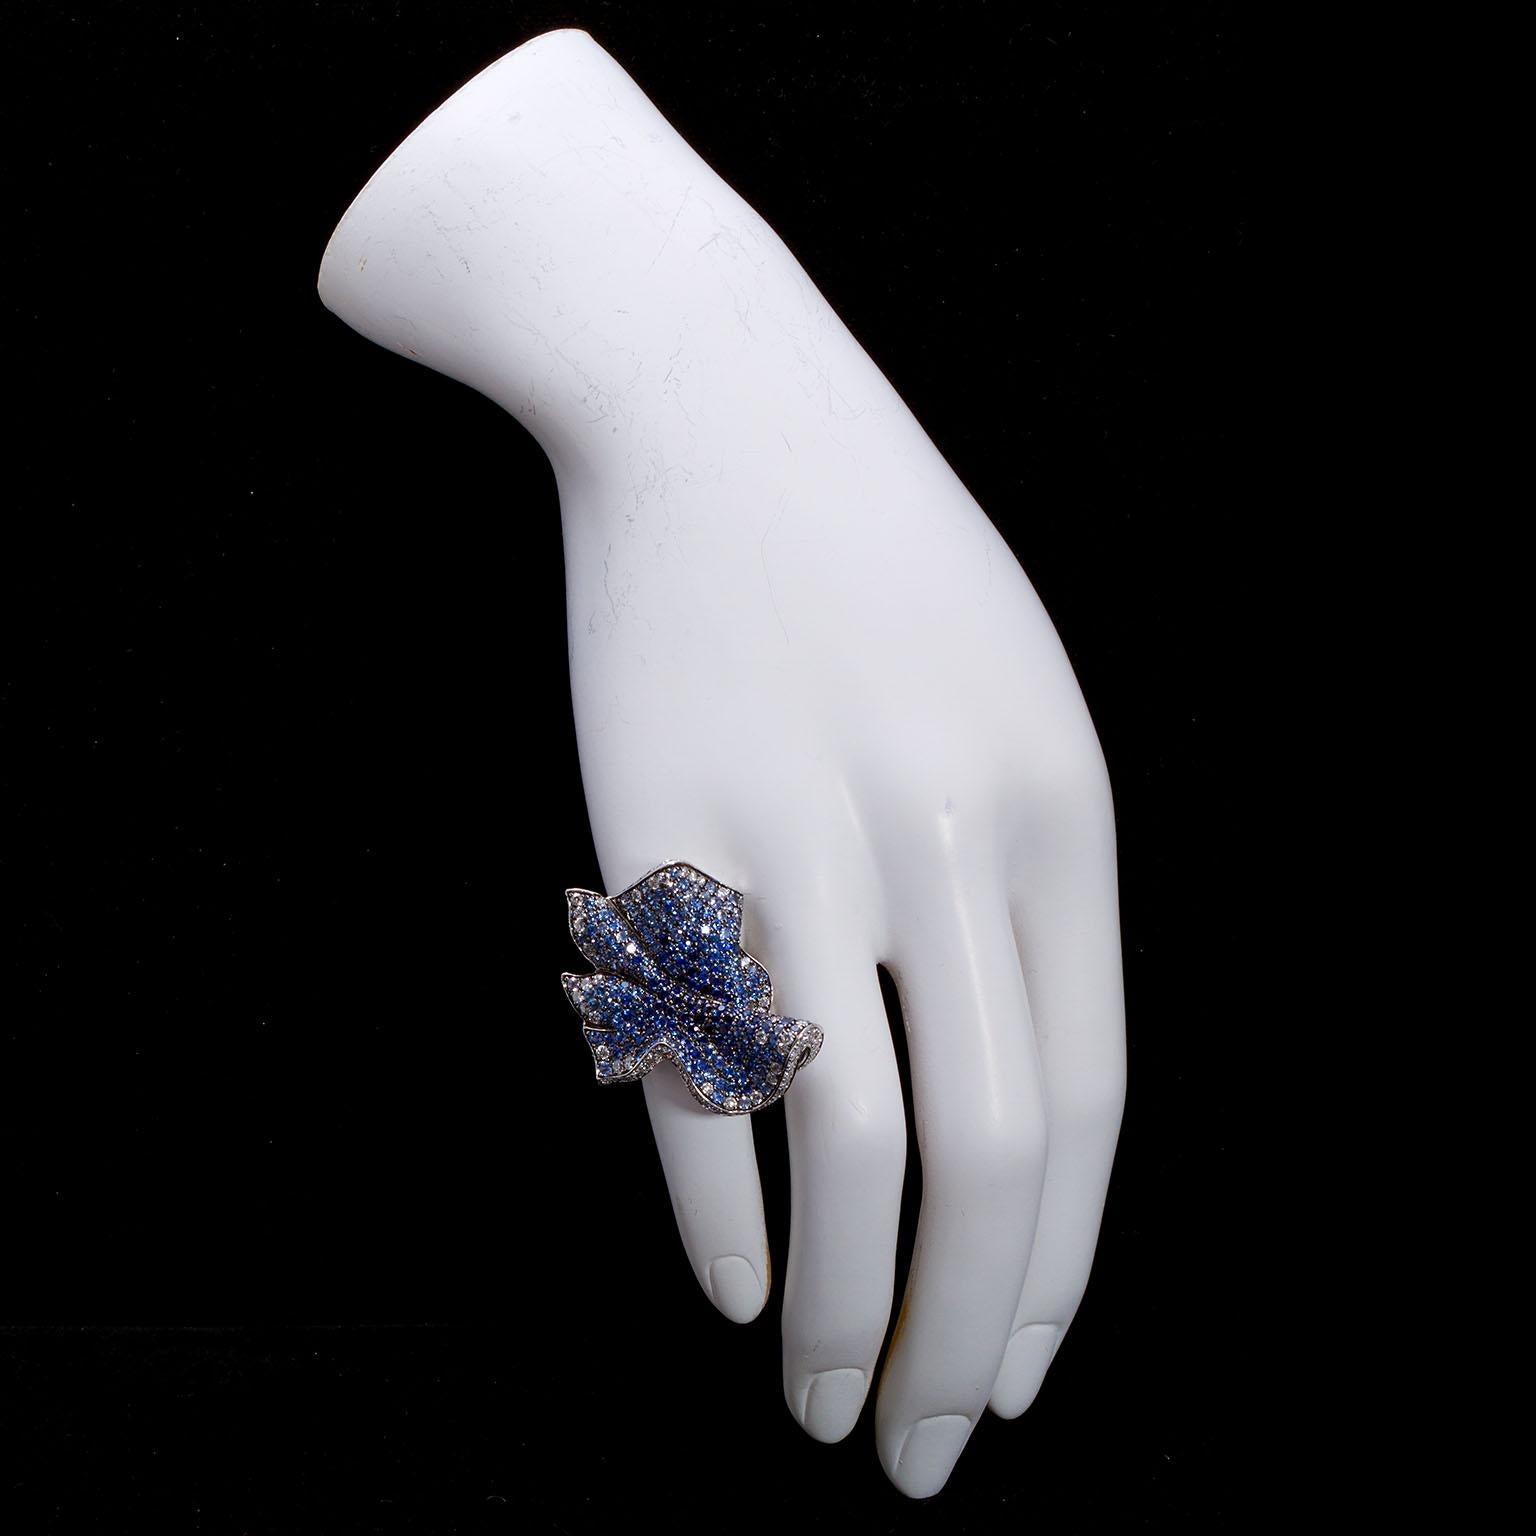 An 18k white gold ring by Italian designer Salavetti, set with 5.03 ctw of round cut sapphires and 2.18 ctw of round diamonds, ring weight 16.30 dwt.
Ring size: 7 US

No. TMWJ-8820